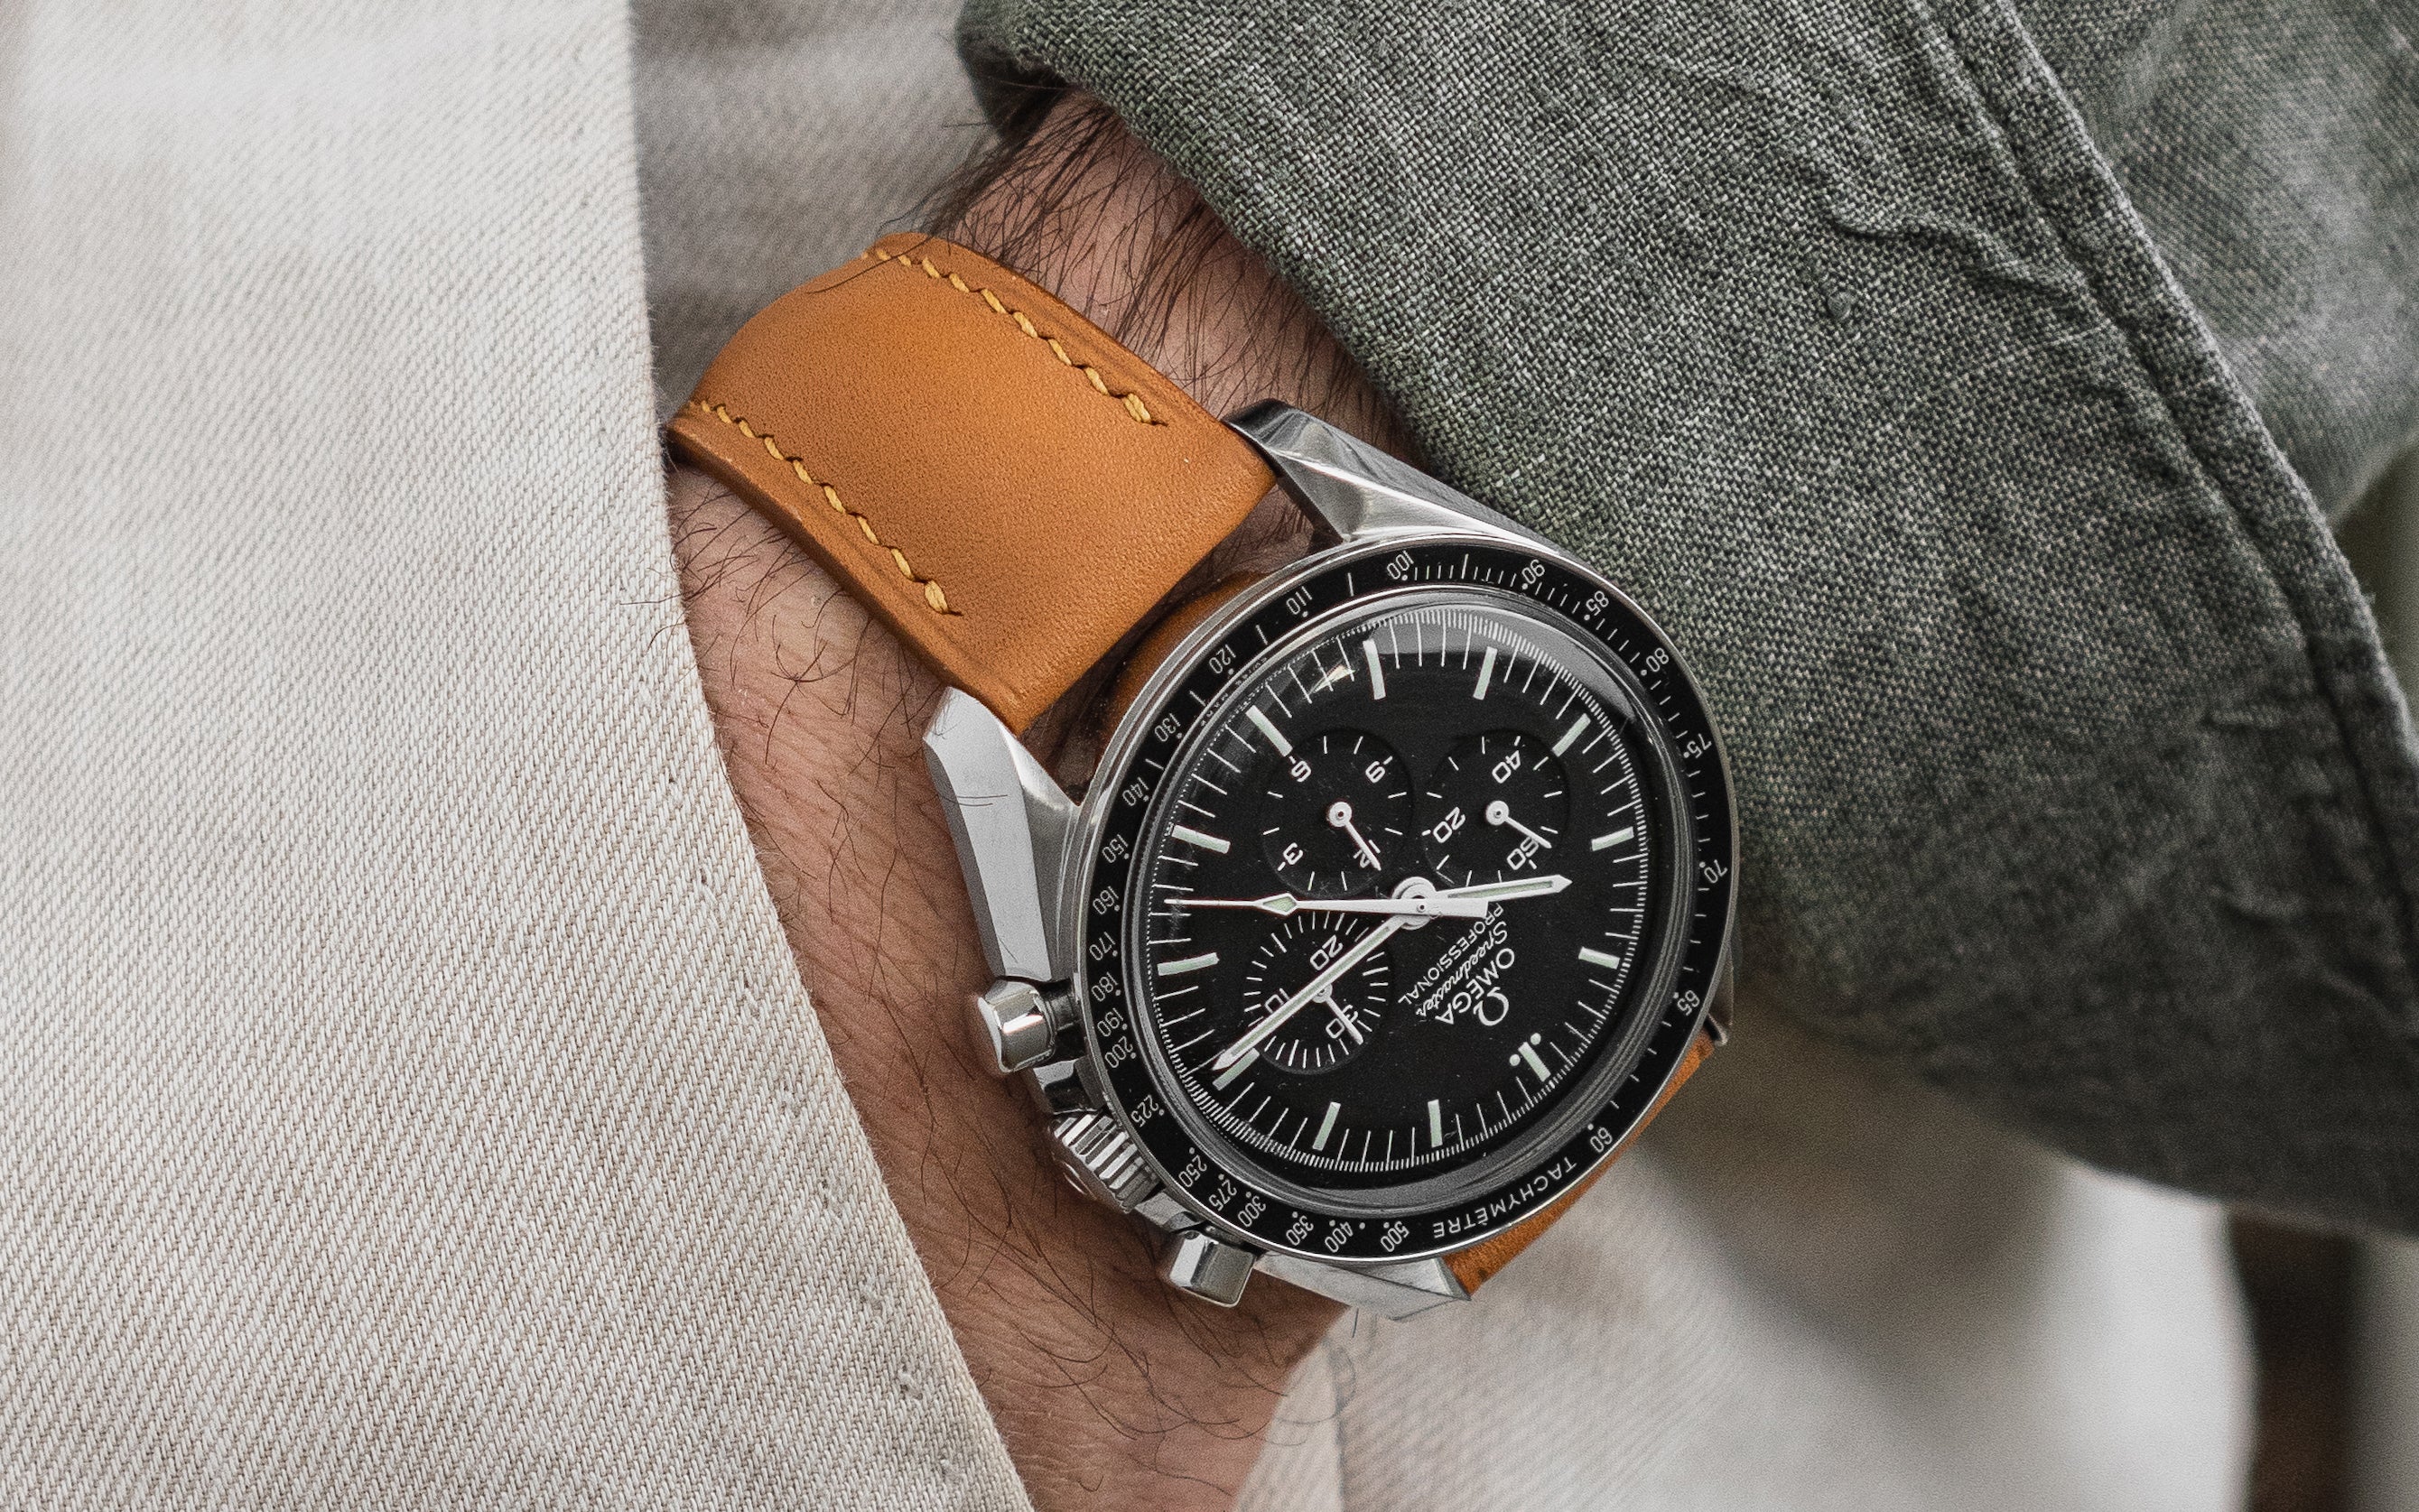 Strap Guide – The Omega Speedmaster Professional